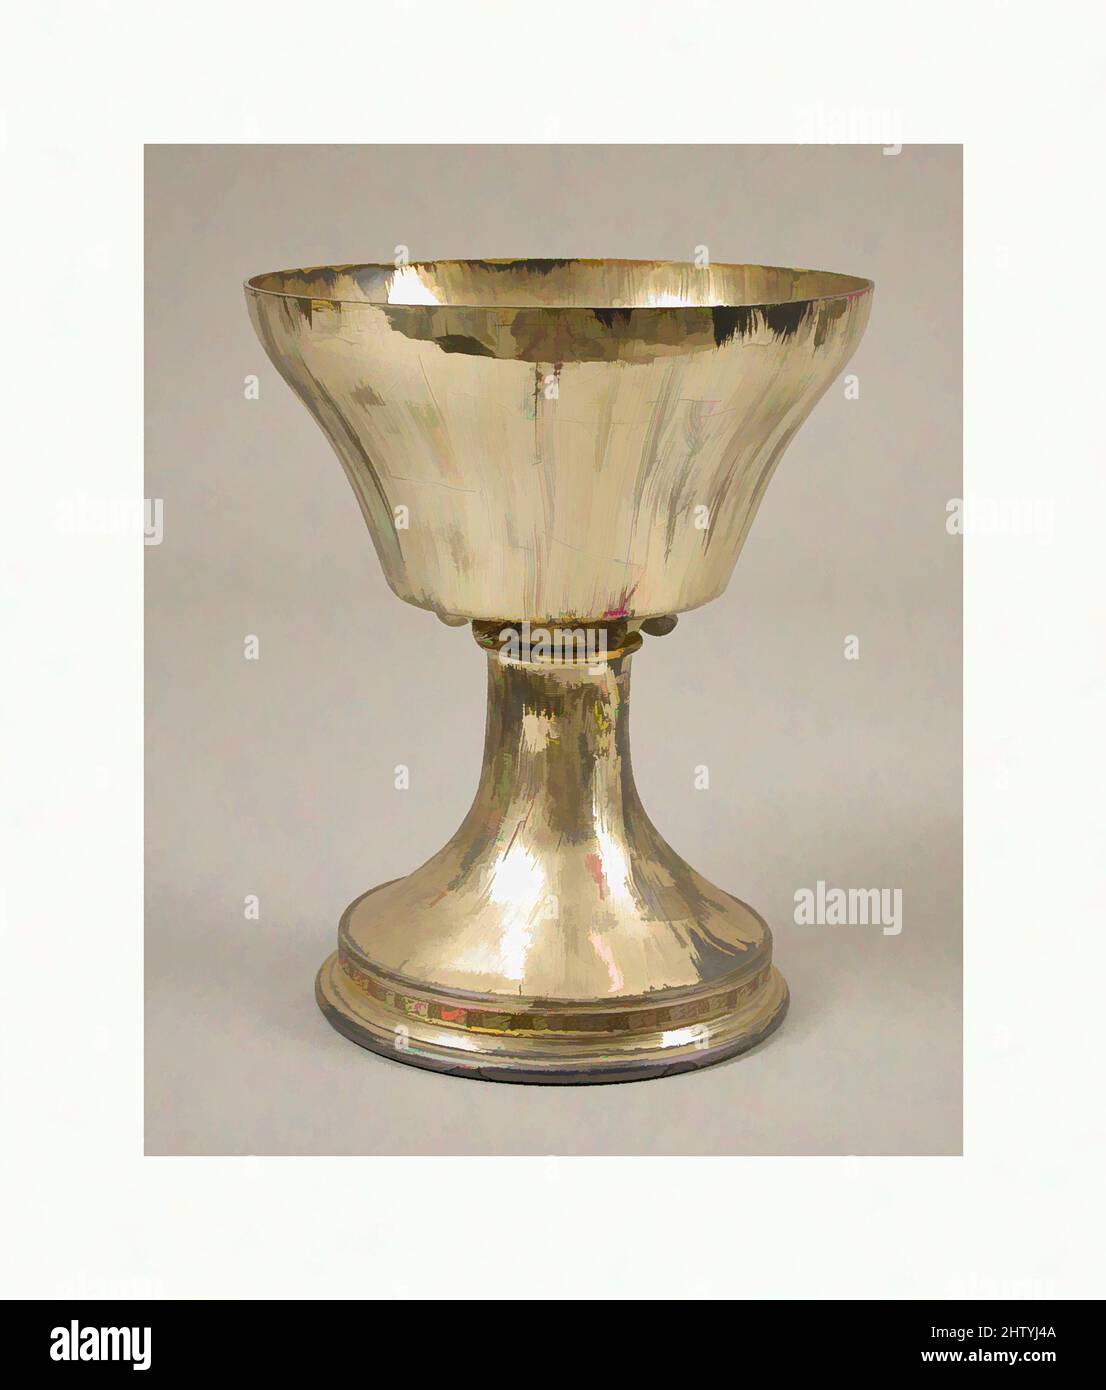 Art inspired by Cup, early 20th century (original dated ca. 1481), British, Silver gilt, Overall: 8 1/2 x 7 in. (21.6 x 17.8 cm), Reproductions-Metalwork, Classic works modernized by Artotop with a splash of modernity. Shapes, color and value, eye-catching visual impact on art. Emotions through freedom of artworks in a contemporary way. A timeless message pursuing a wildly creative new direction. Artists turning to the digital medium and creating the Artotop NFT Stock Photo